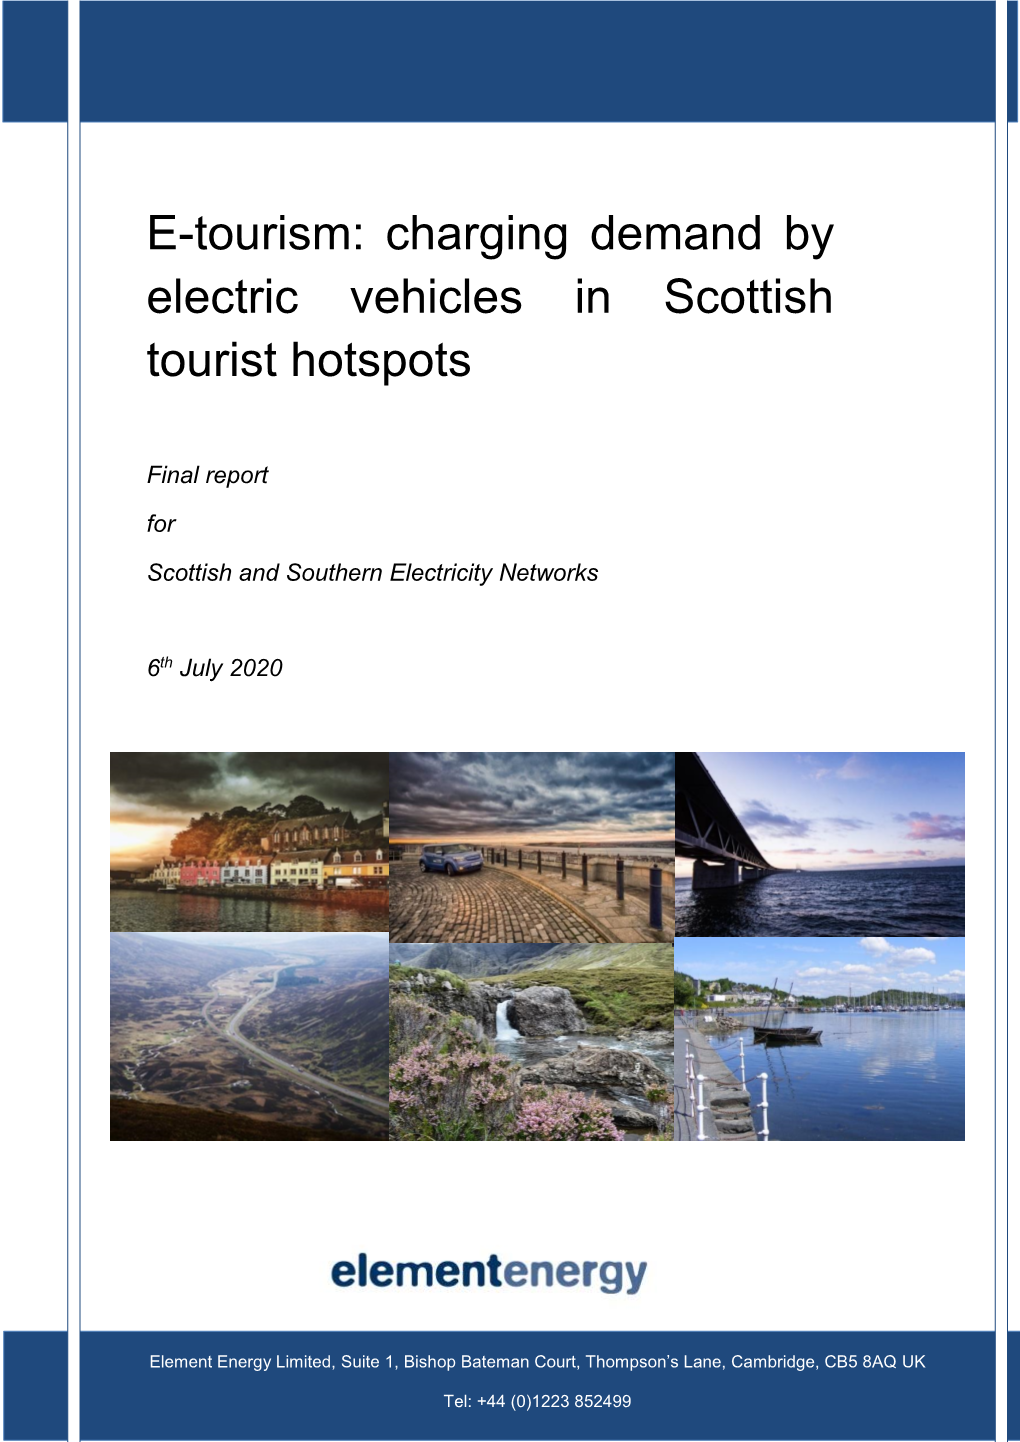 E-Tourism: Charging Demand by Electric Vehicles in Scottish Tourist Hotspots